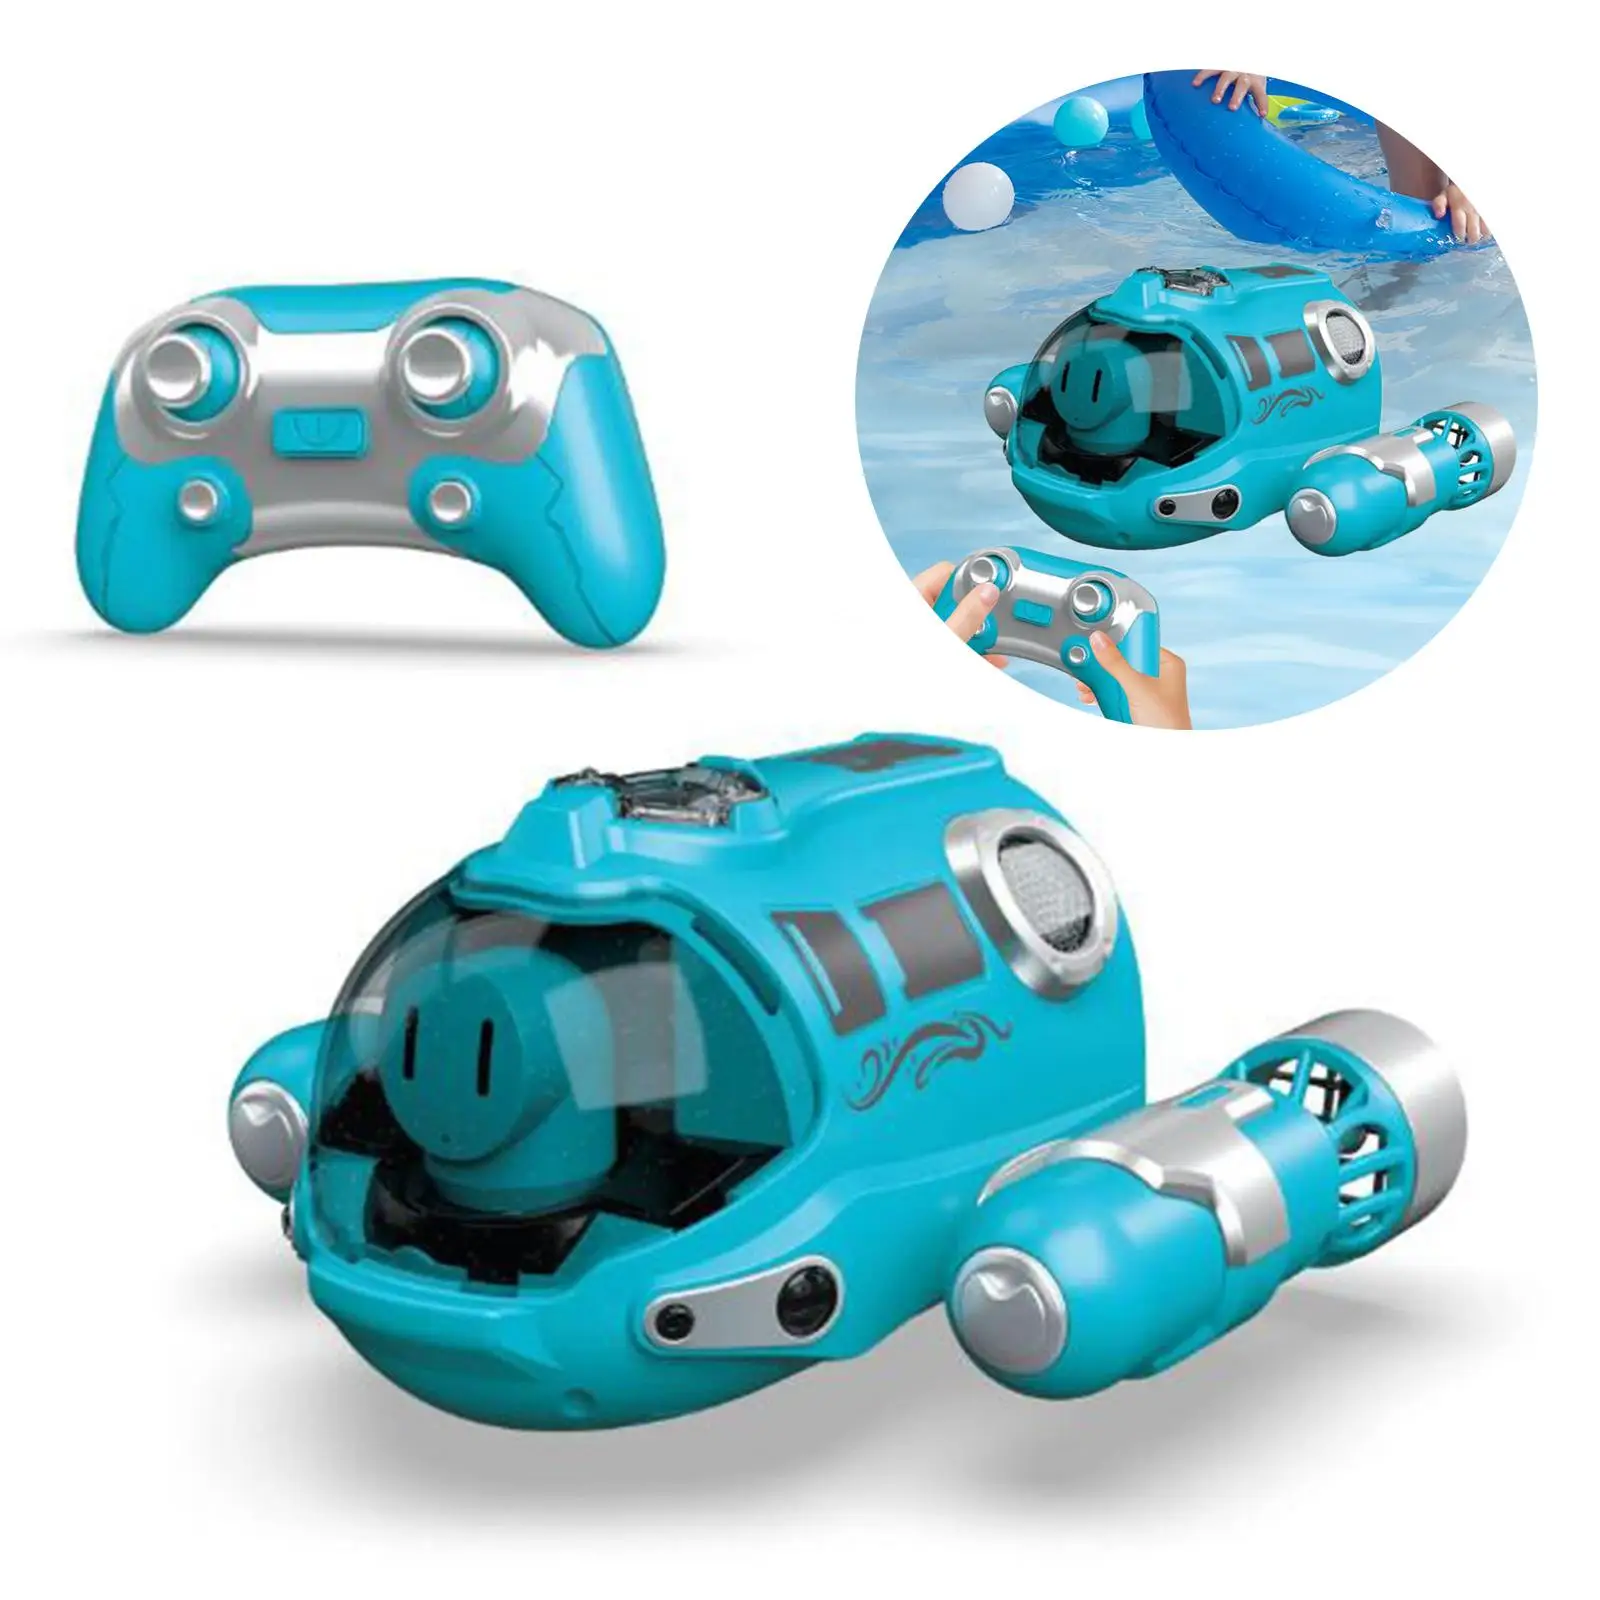 Remote Control Spray Gasboat Simulation Forward Backward Light up RC Boat Water Toy for Park Gift Swimming Pool Lake Adults Kids